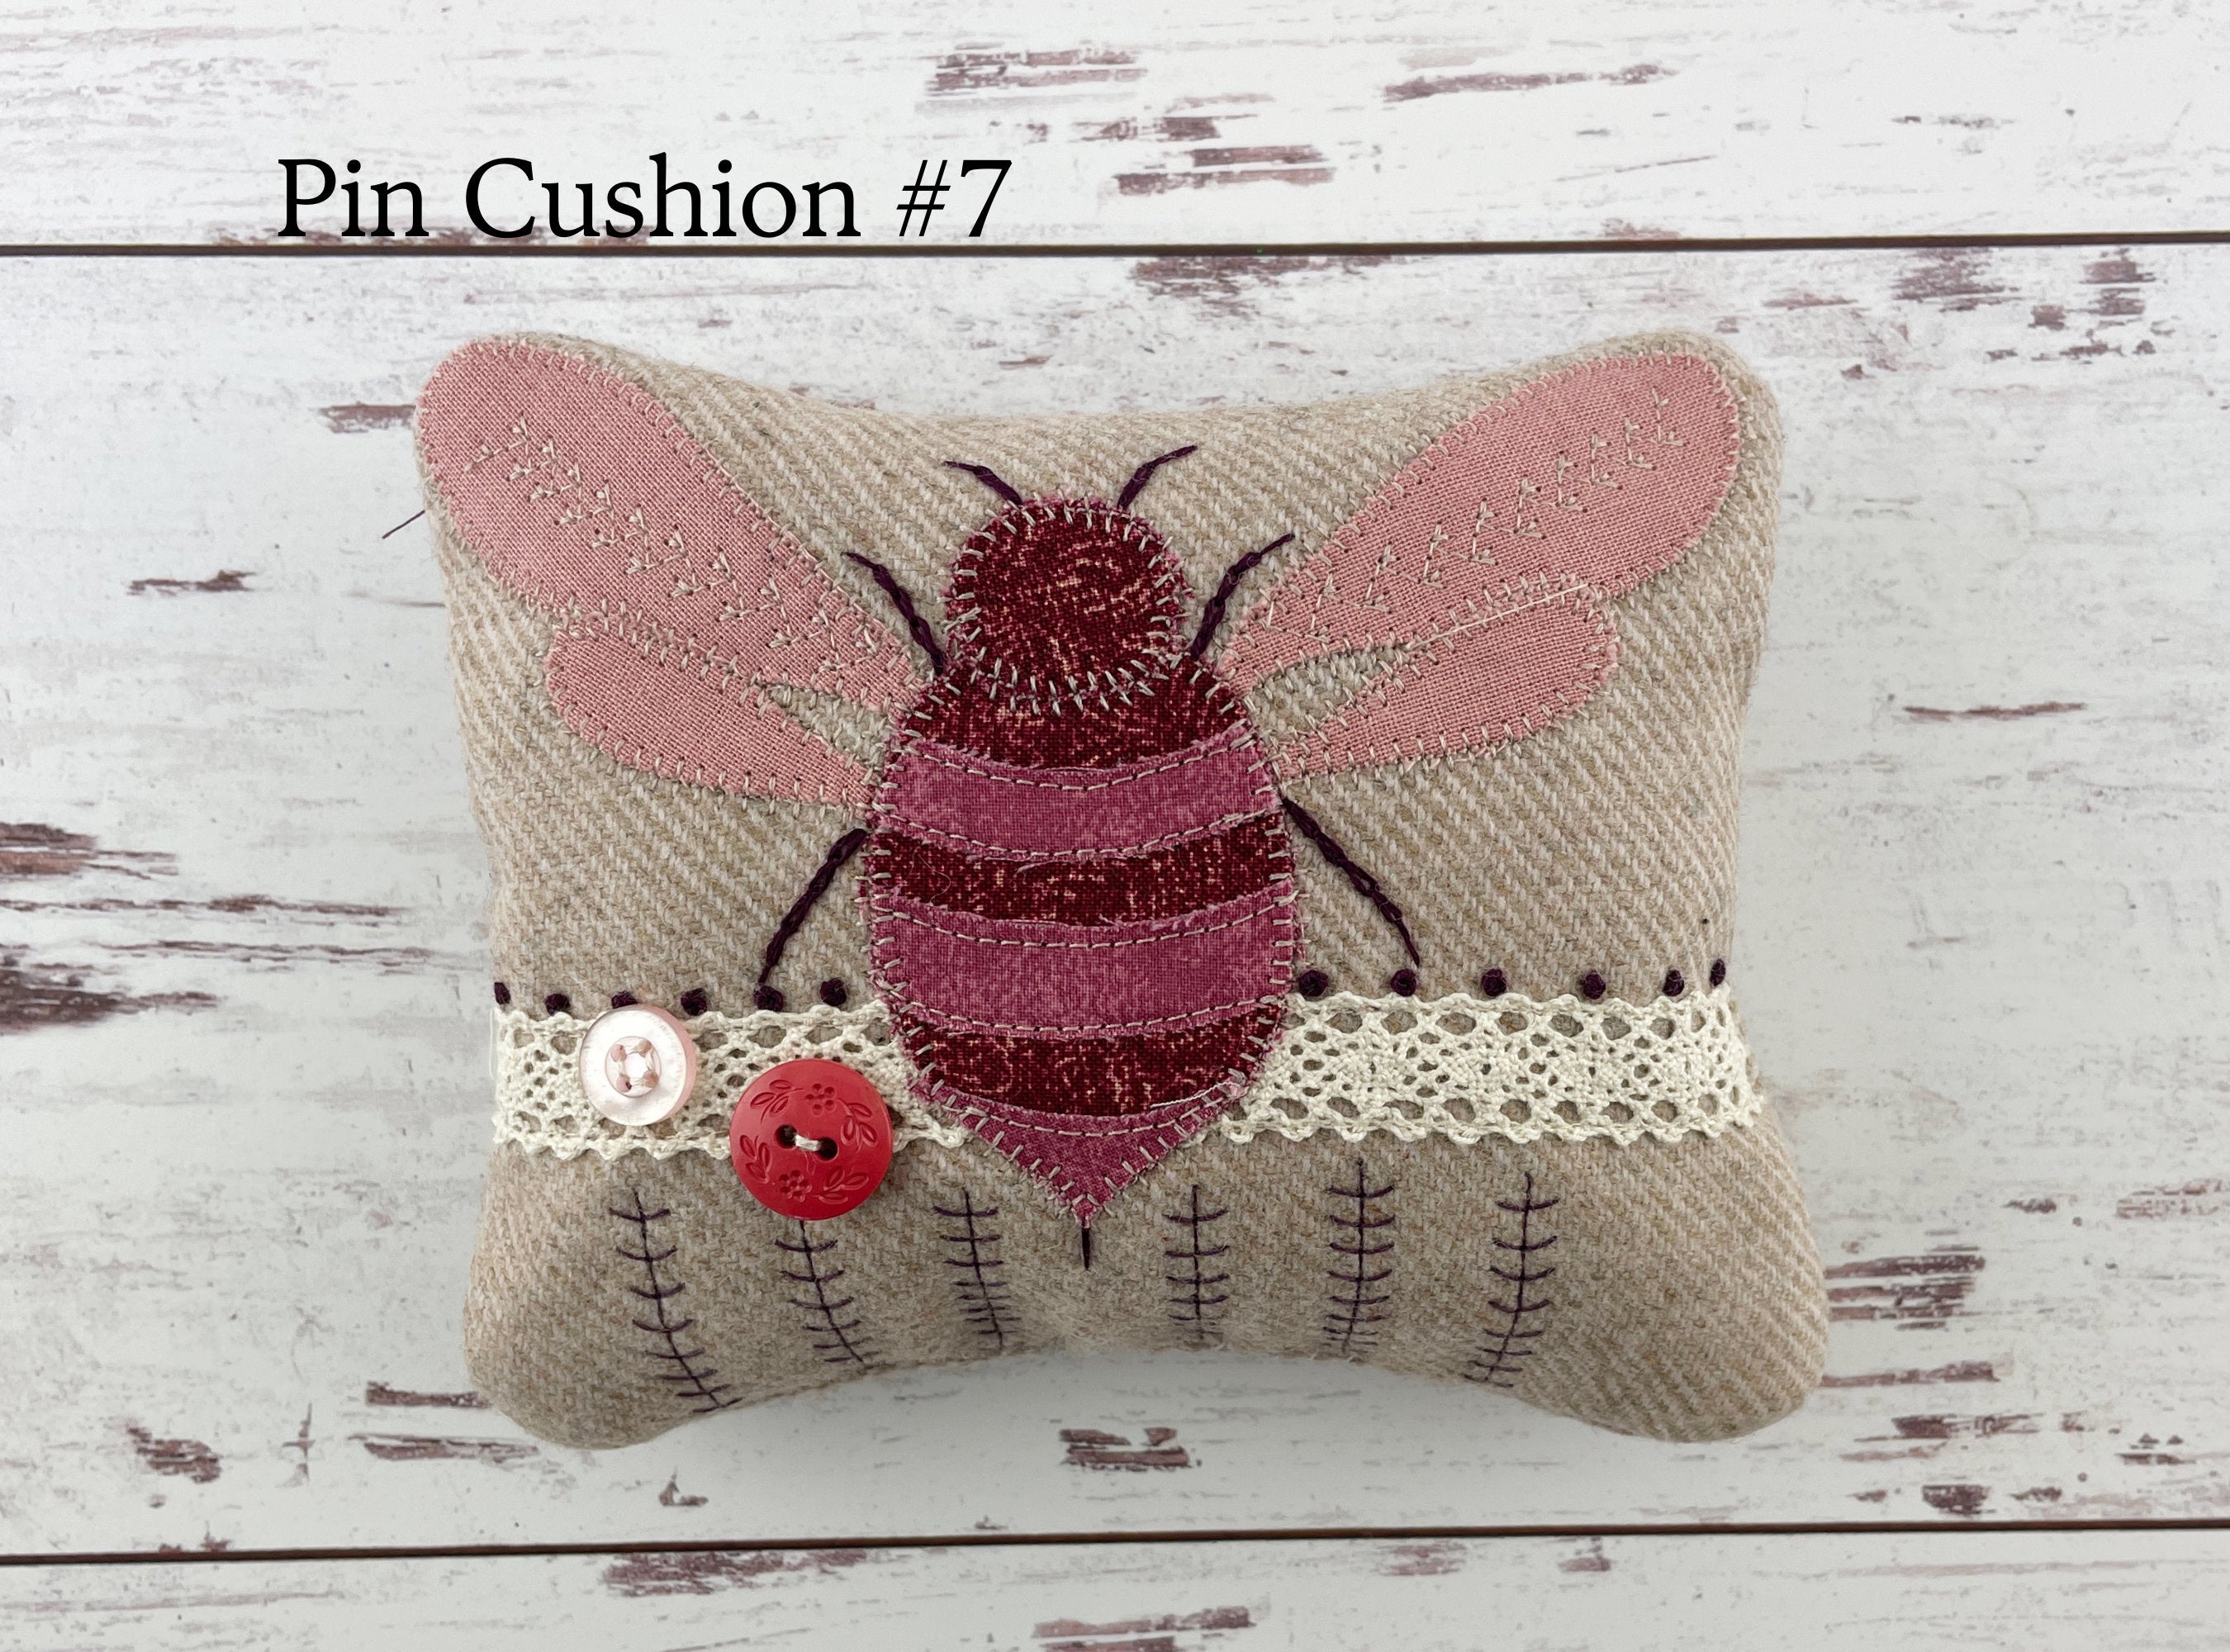 Handmade Bee Pin Cushion for the Sew-ist / One-of-a-Kind Appliqued and Embroidered Pin Cushion